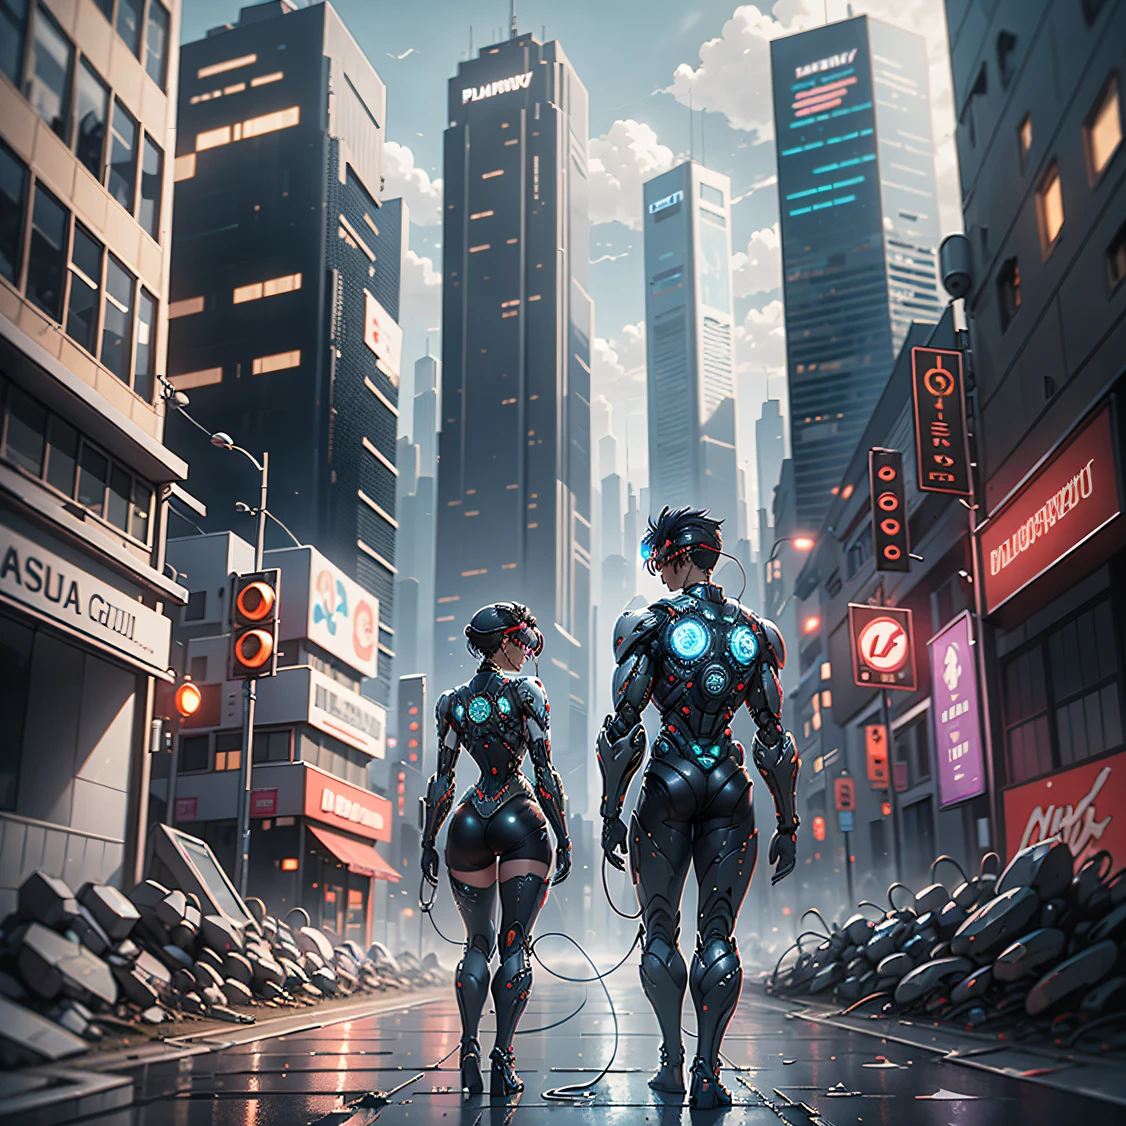 In an abandoned cyberpunk city, towering skyscrapers are tangled in dilapidated wires and pipes under gray skies. On the streets, people wear black bionic glasses and robotic arms, and wear shiny metal outfits, walking hurriedly through the maze of light and shadow. The phantom of virtual reality wafts around, filling the entire city with a sense of future technological mystery.
 ，masterpiece, best quality，8k, ultra highres，